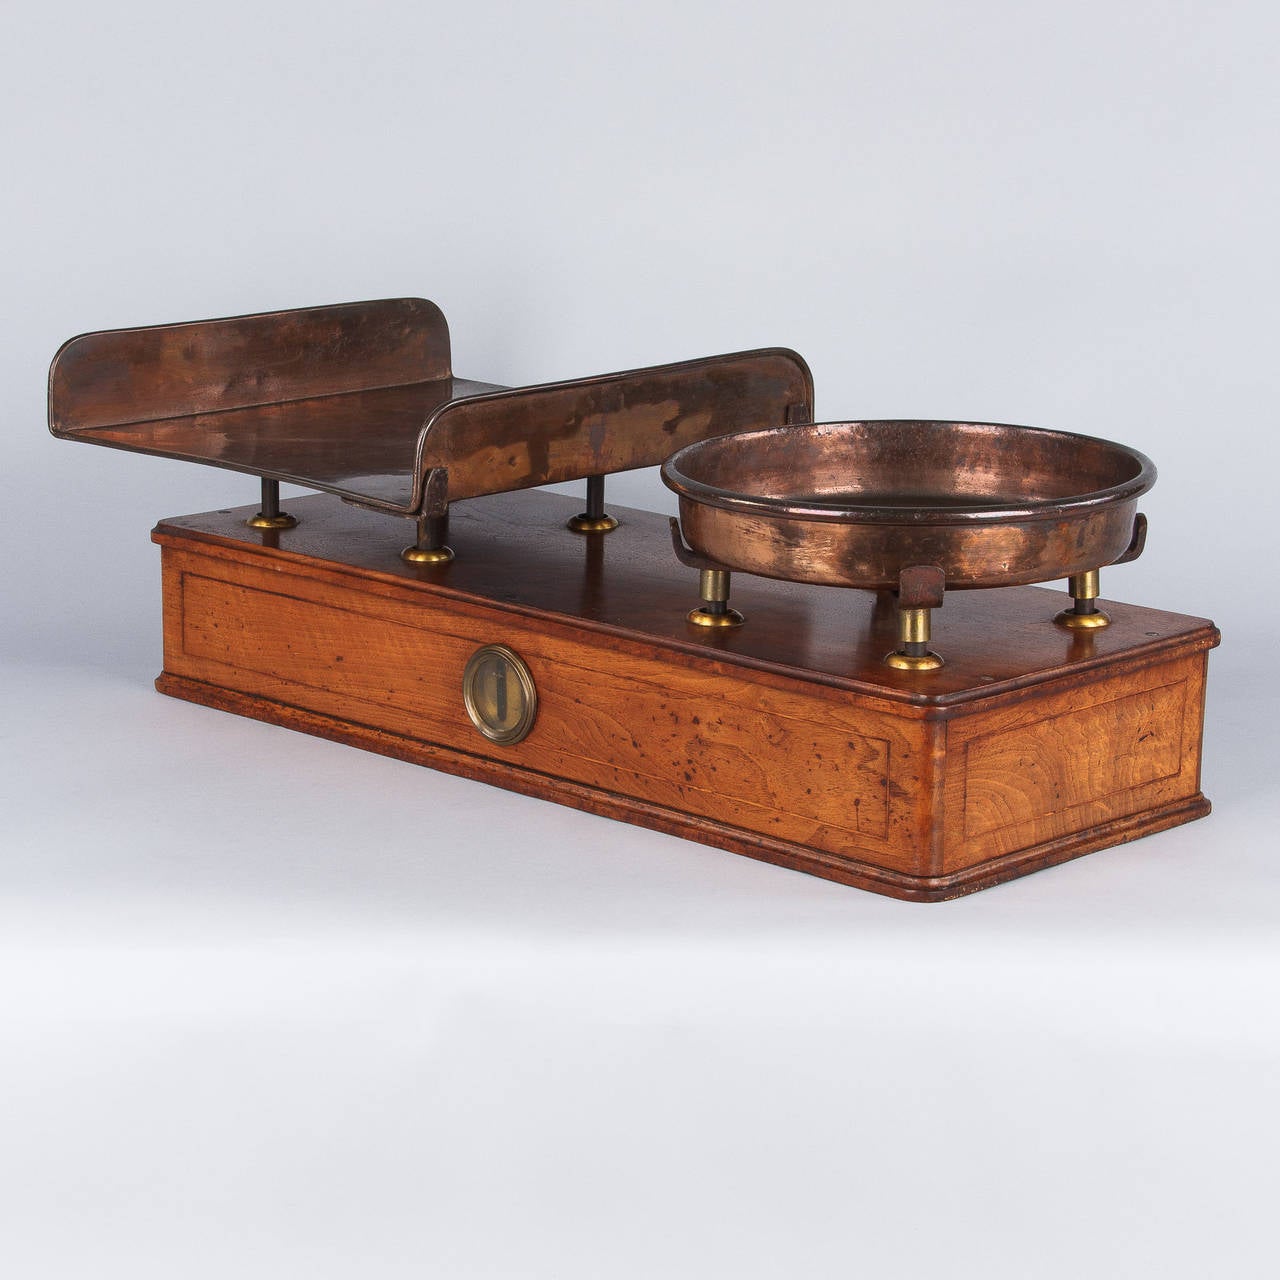 A wonderful scale from a silk traders factory in Lyon. This large scale dates from the Louis Philippe period, mid-1800s and is made of walnut wood with copper pans. The rectangular pan was used for samples of fabric and the round pan for weights. A